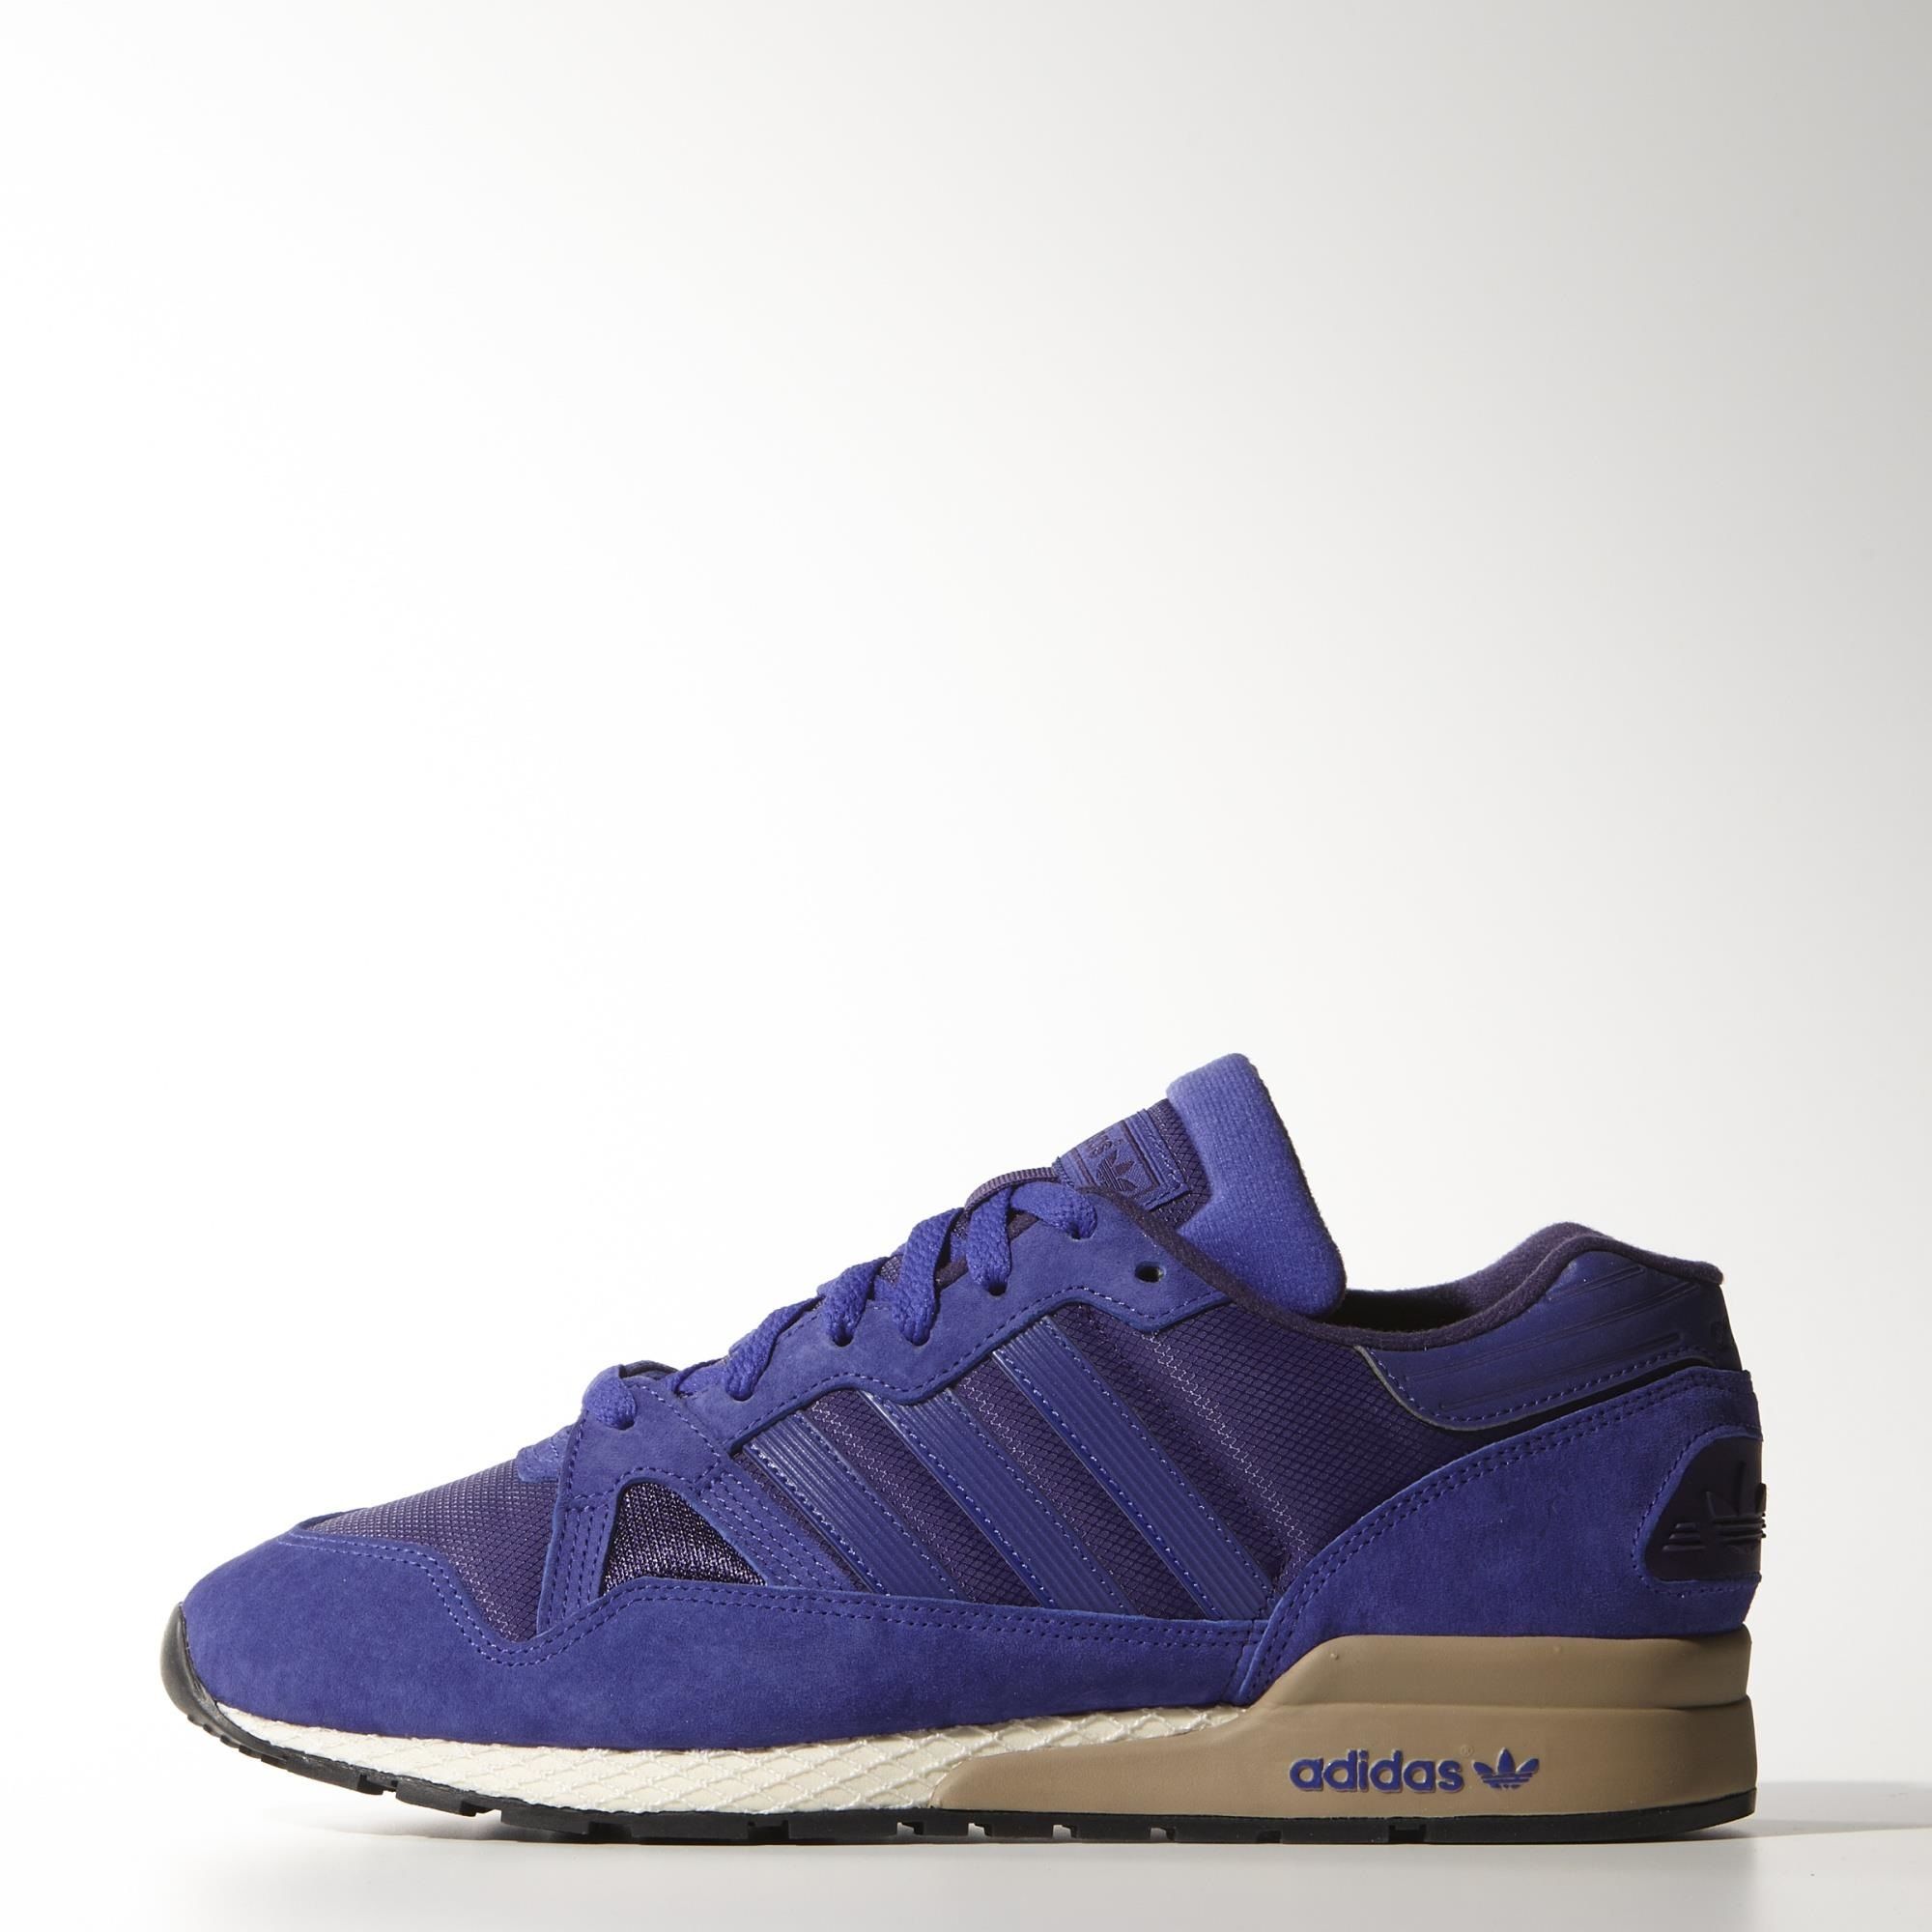 adidas zx 710 chaussures